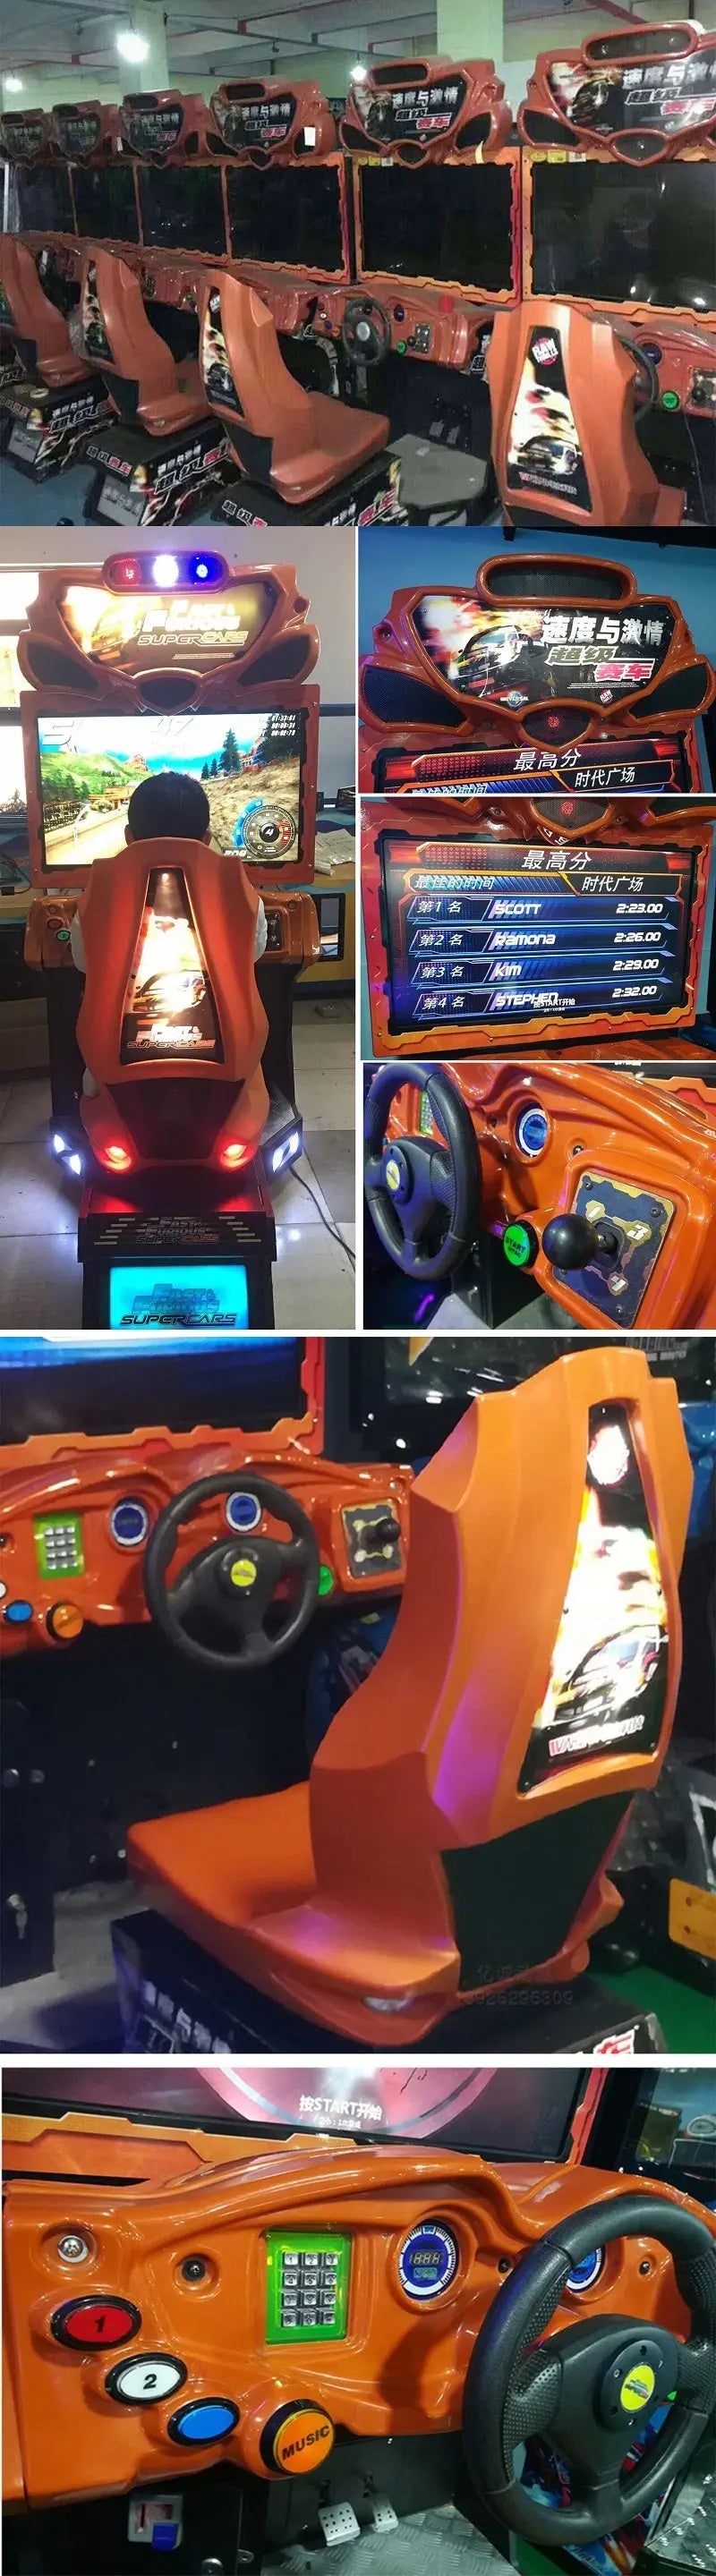 Super-Car-Racing-Arcade-Game-machine-Fast-&-Furious-Amusement-Coin-Operated games-Tomy-Arcade-workshop-process